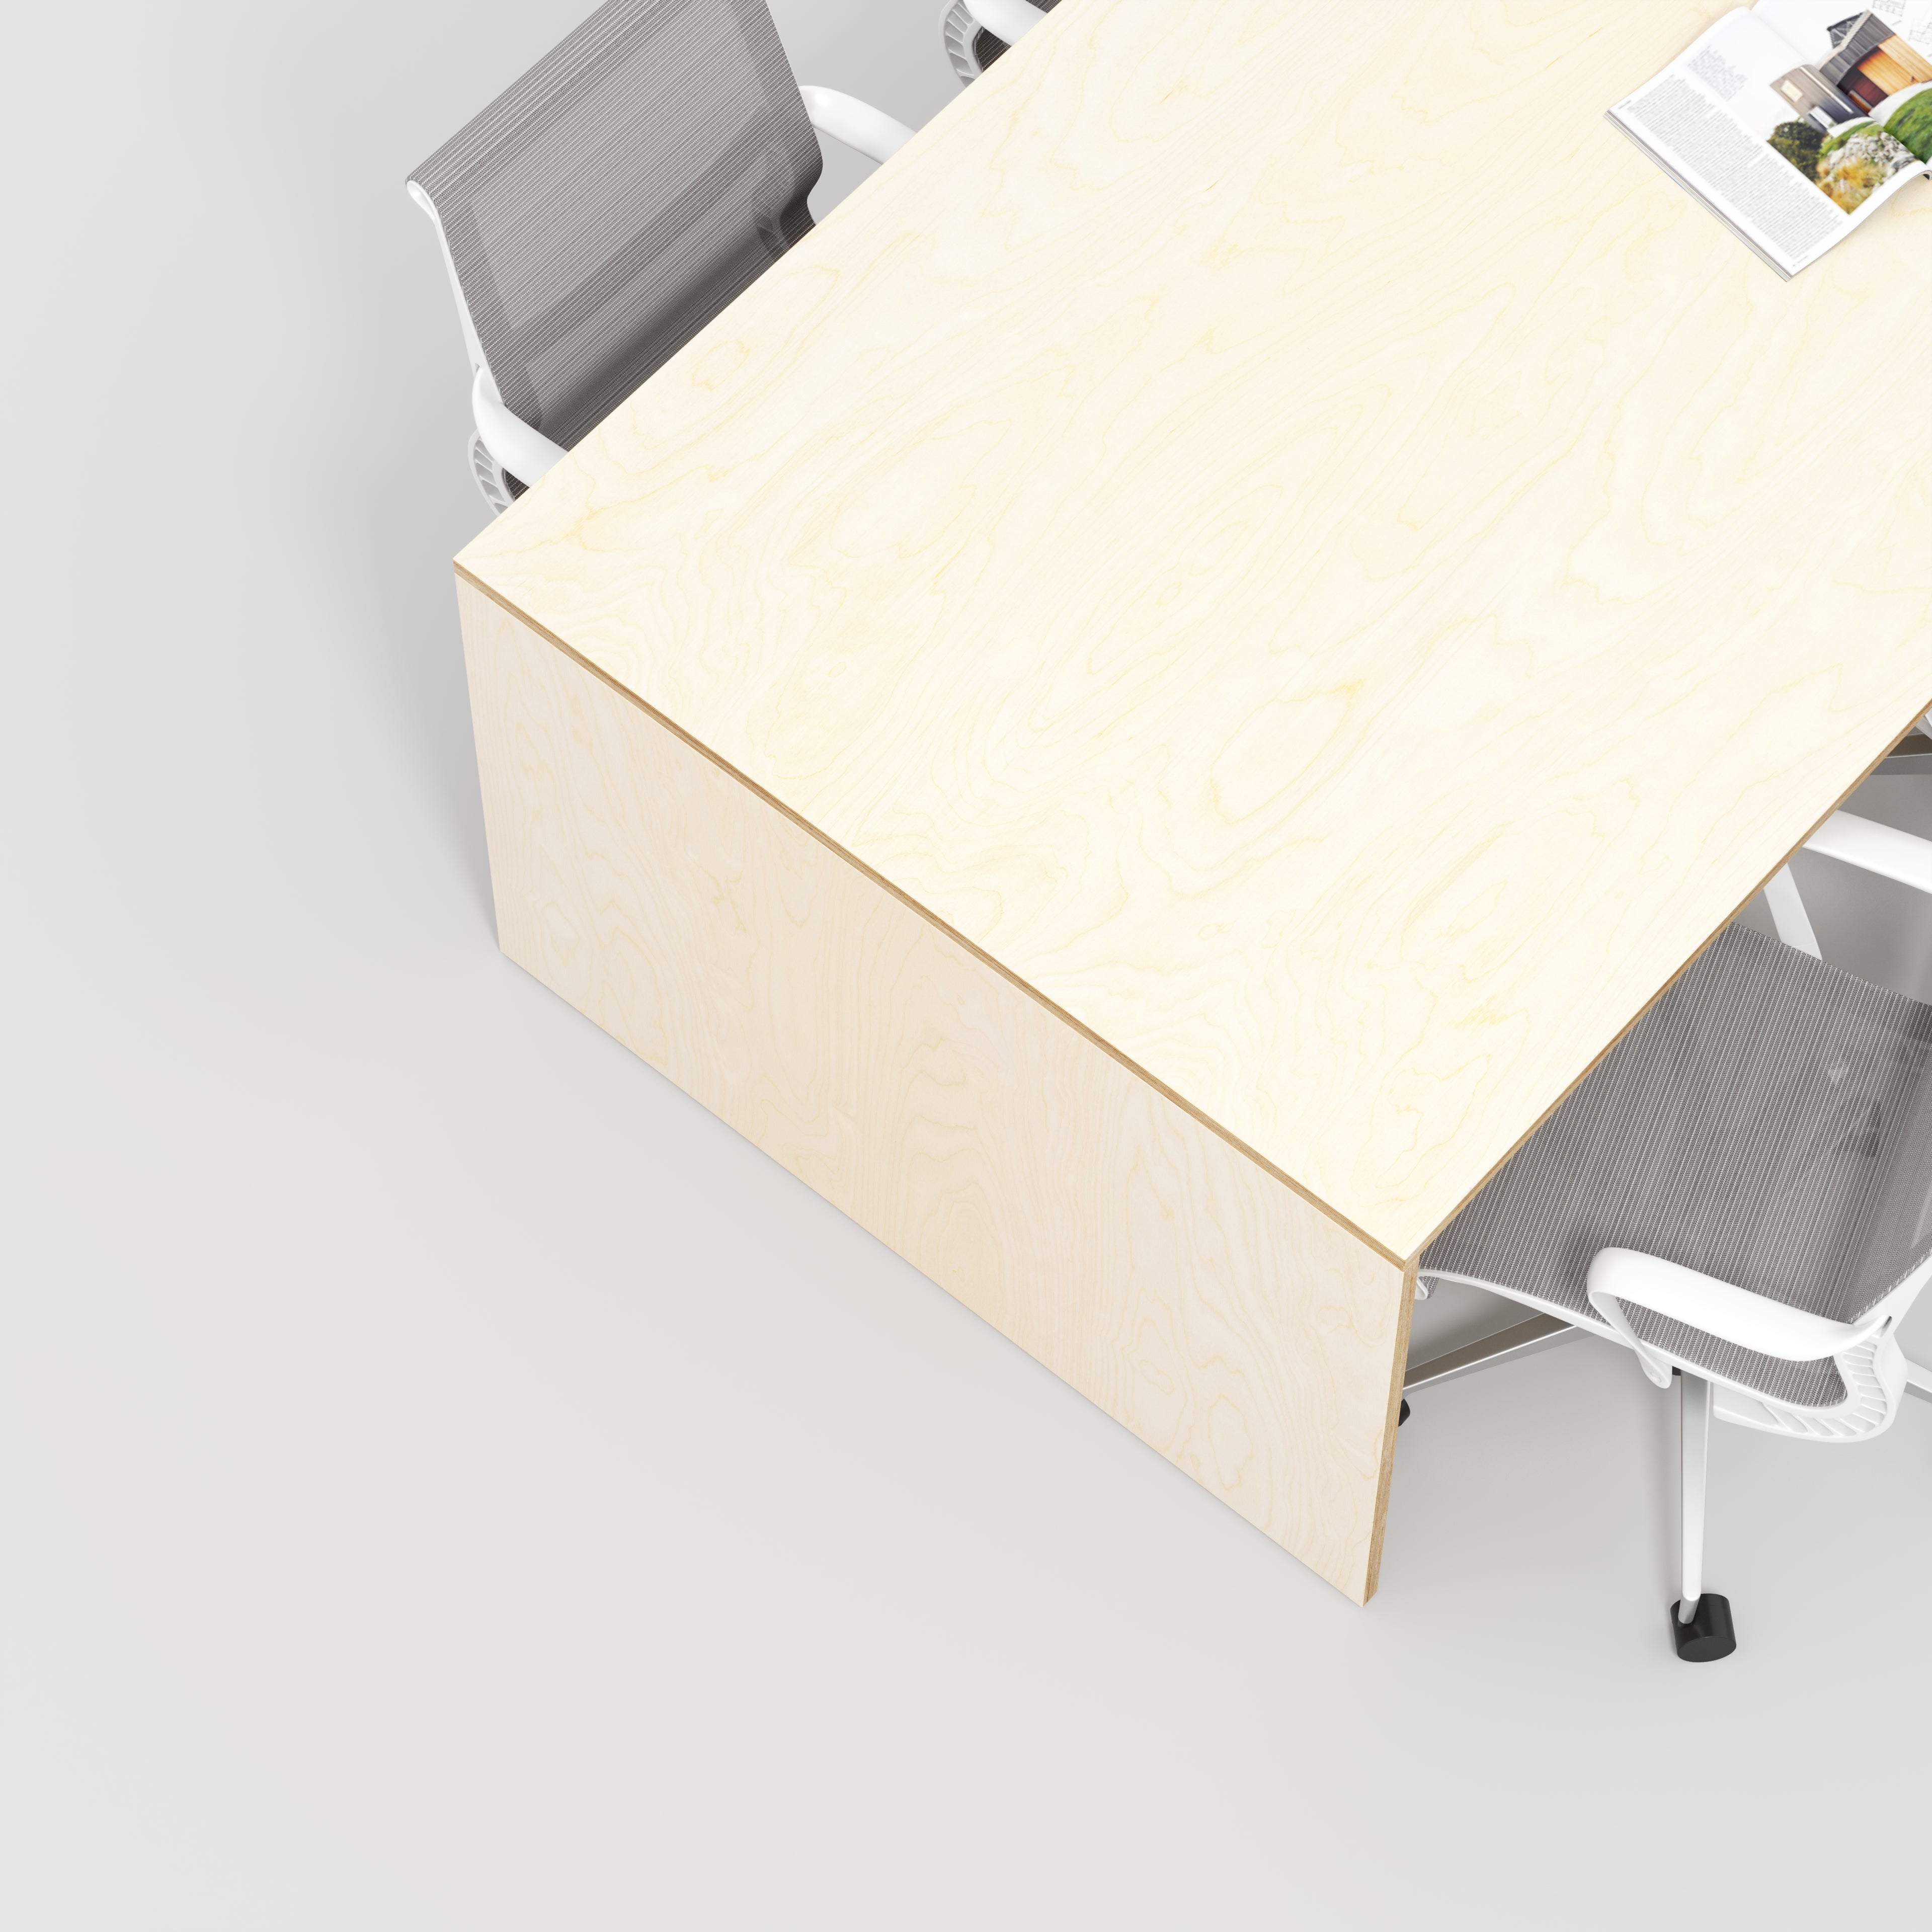 Table with Solid Sides - Plywood Birch - 2400(w) x 1200(d) x 750(h)